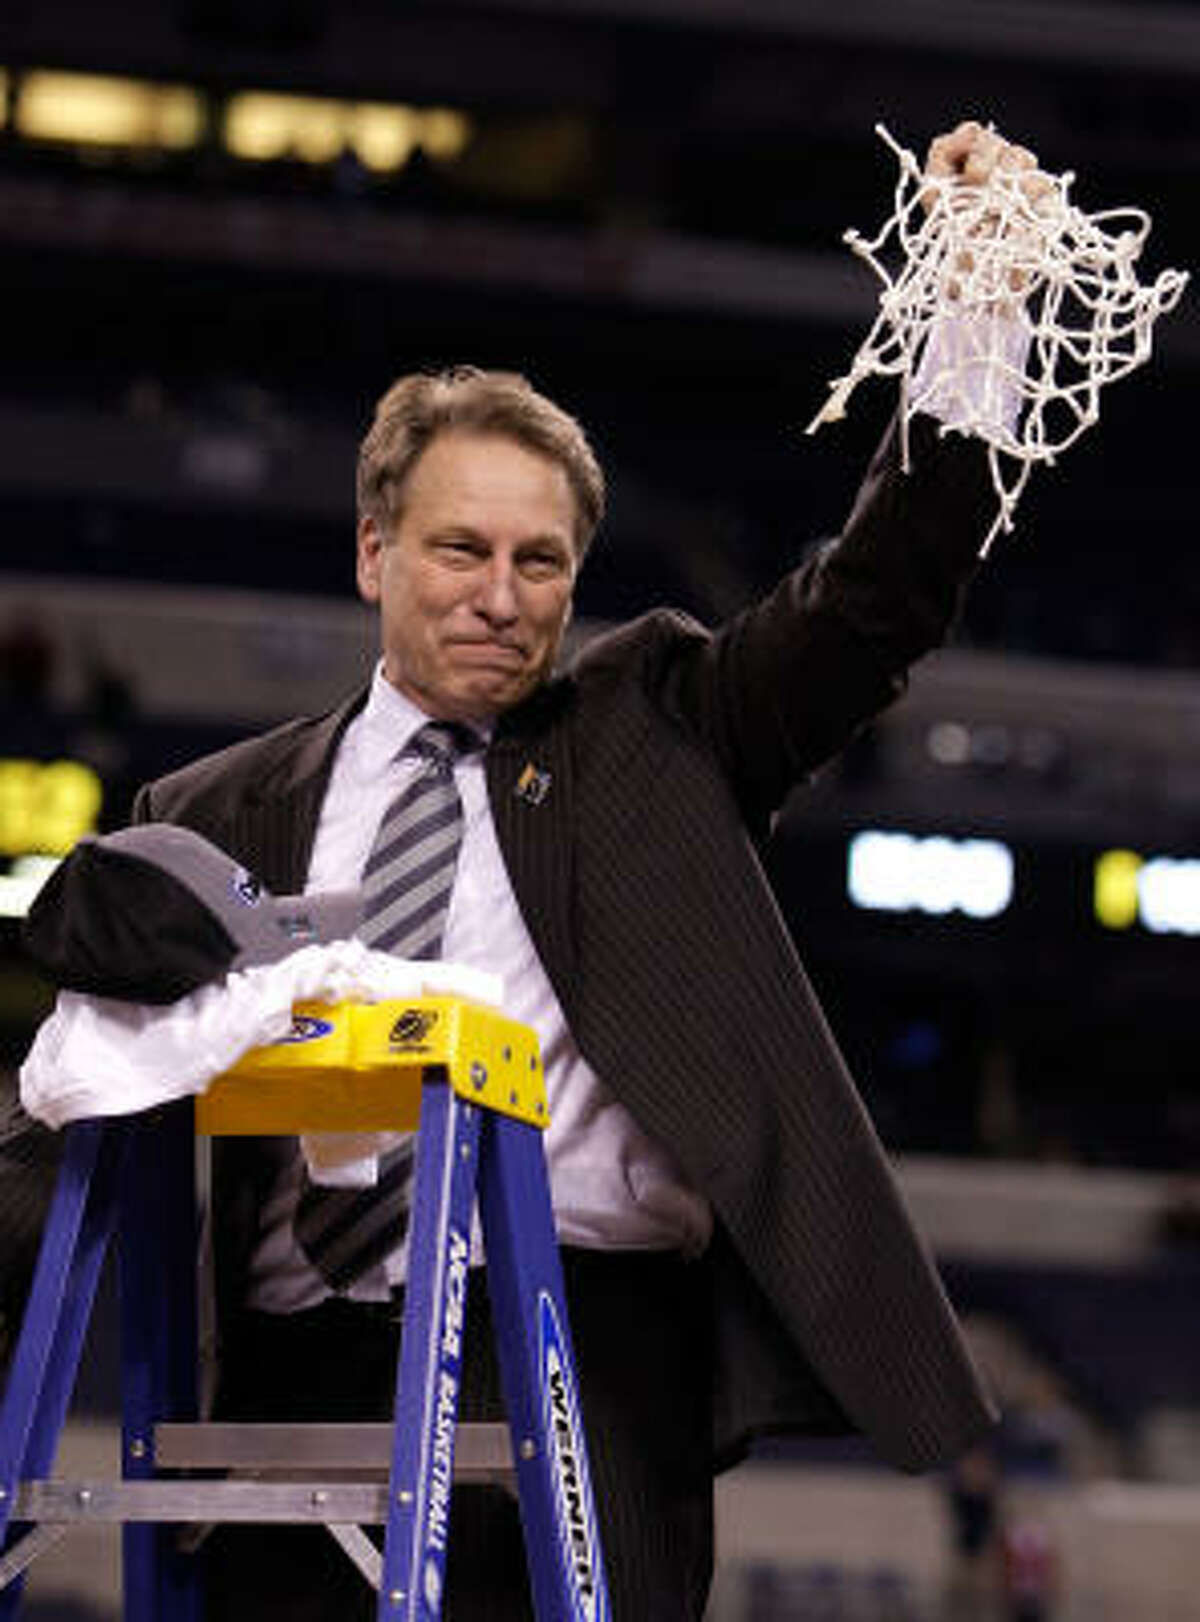 Midwest Region: Michigan State 64, Louisville 52 Michigan State coach Tom Izzo celebrates after cutting down the net following their 64-52 win against Louisville.